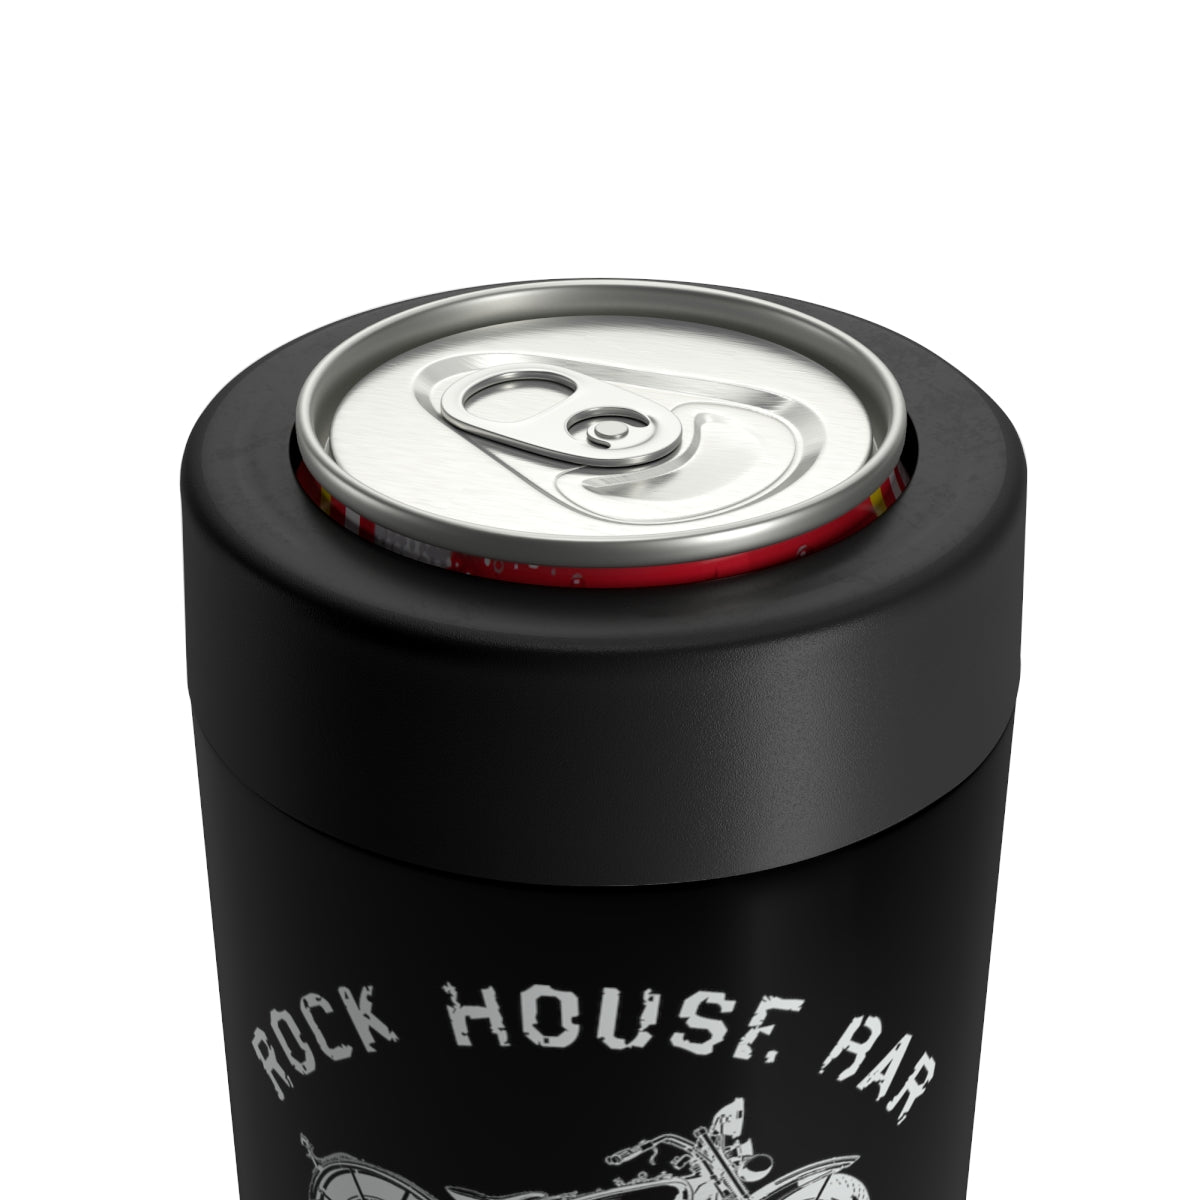 Rock House Bar Can Holder - Motorcycle